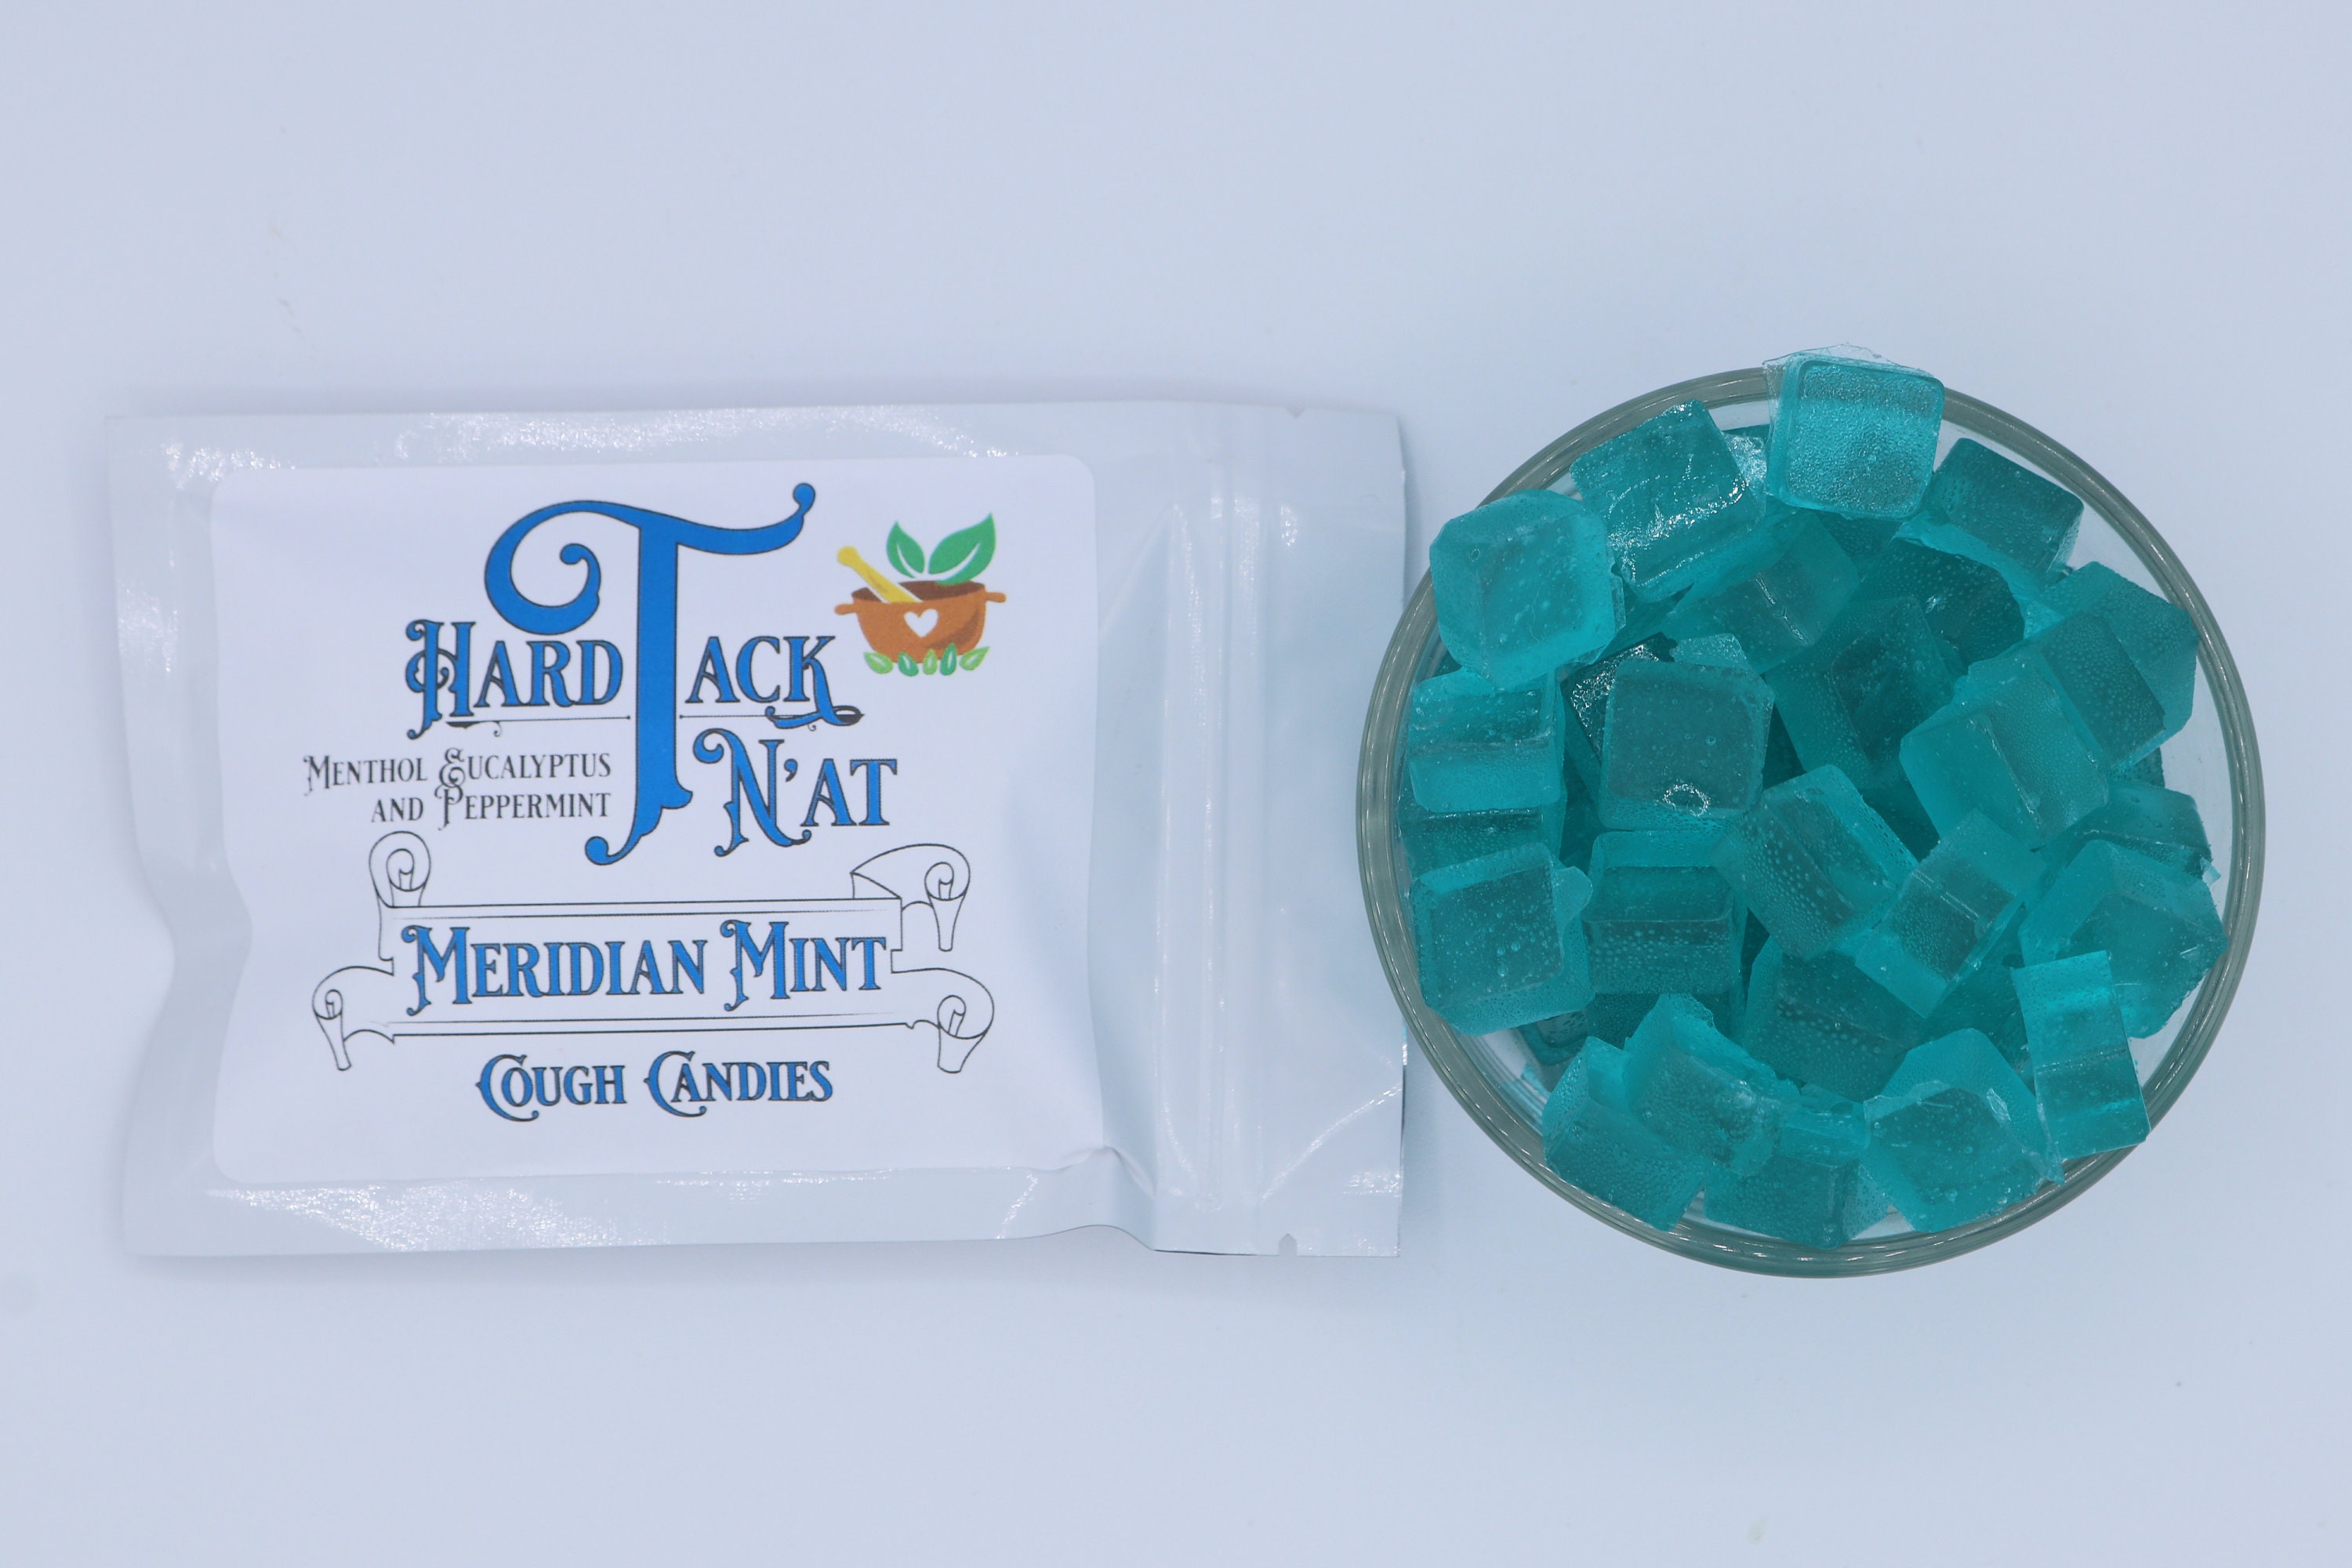 Blue Raspberry Hard Tack Candy, Rock Candy, Old-fashioned